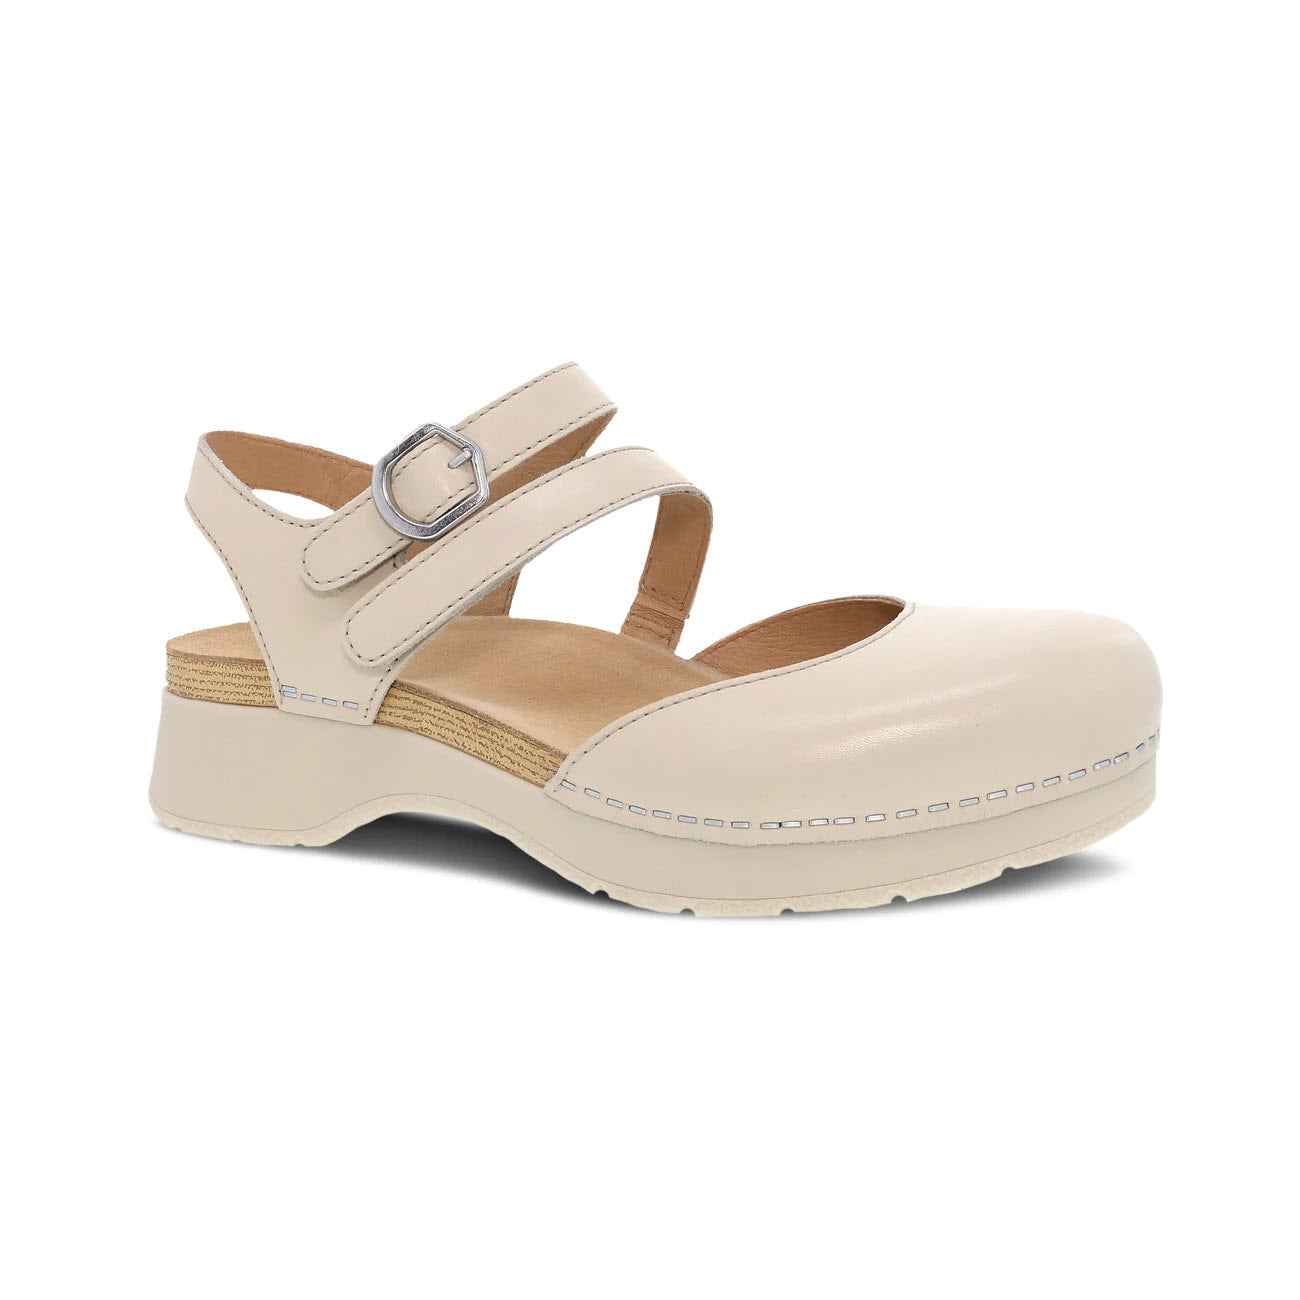 A single ivory Dansko Rissa mary jane style shoe with a closed toe, buckle strap, and chunky sole, displayed on a white background.